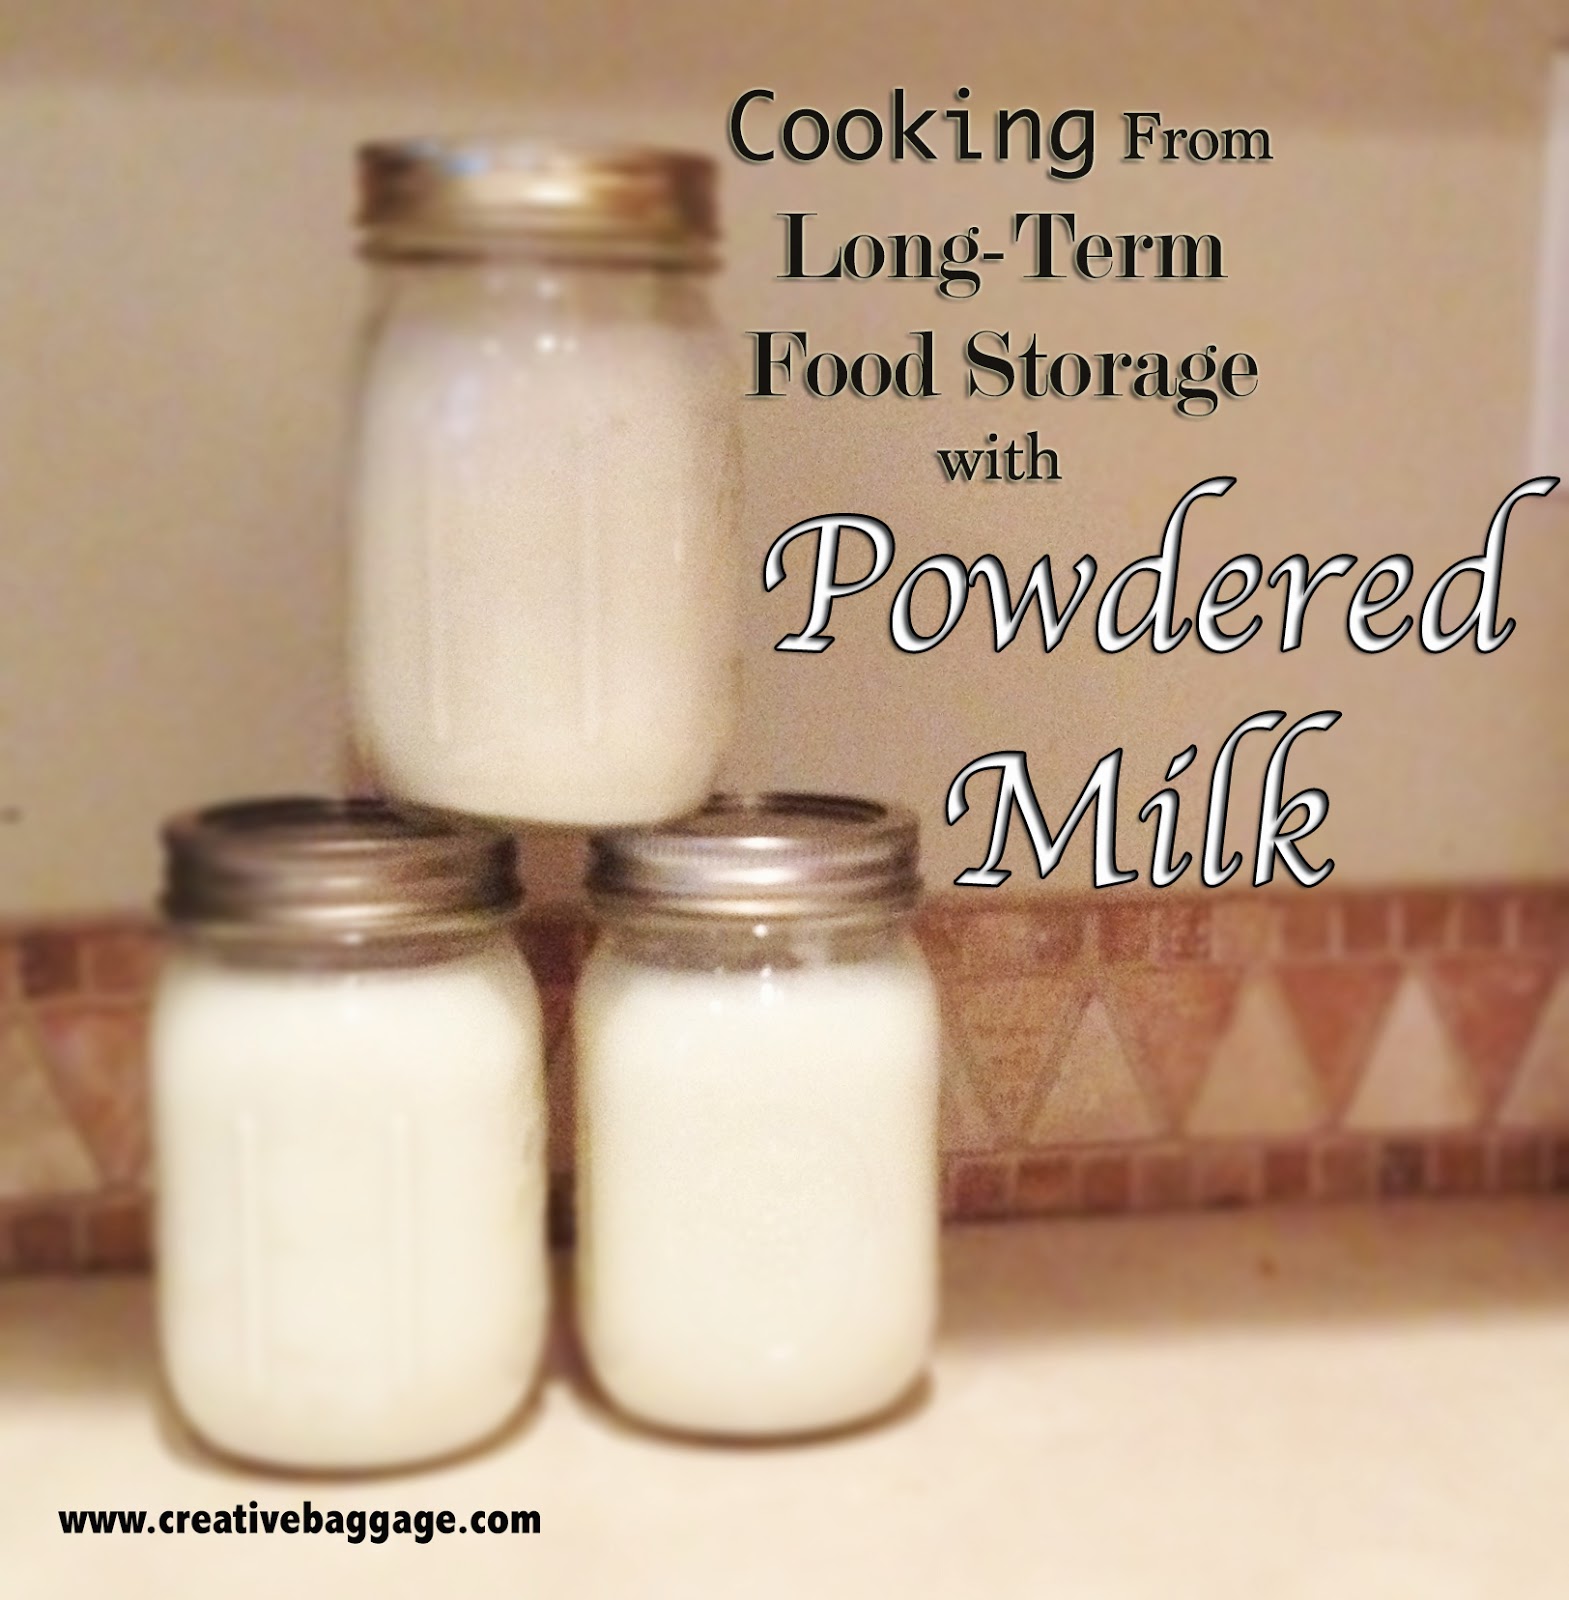 Cooking from long-term food storage with powdered milk